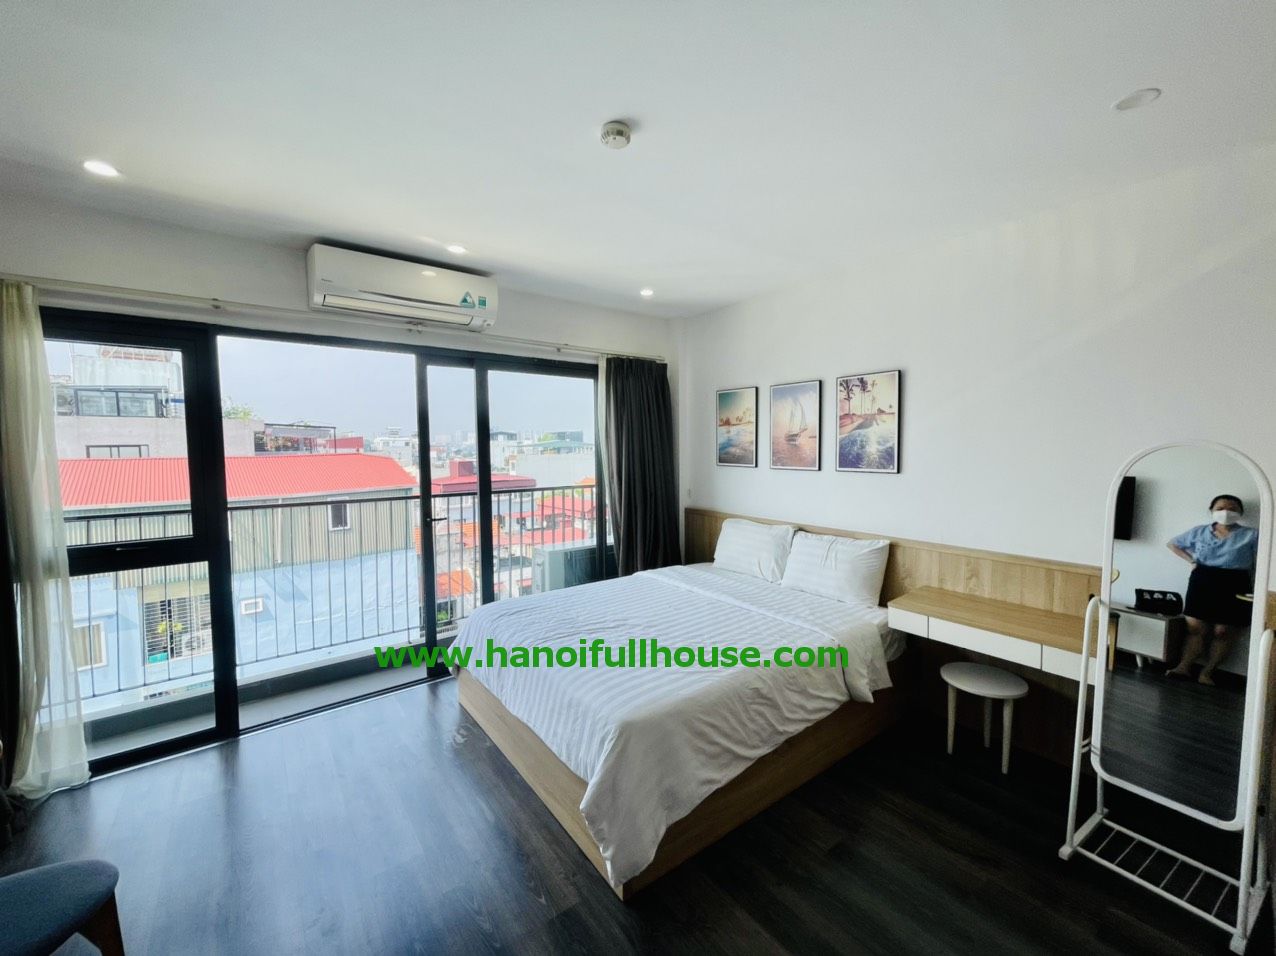 Modern, bright & fully serviced studio located on Xuan Dieu street with a very favorable price